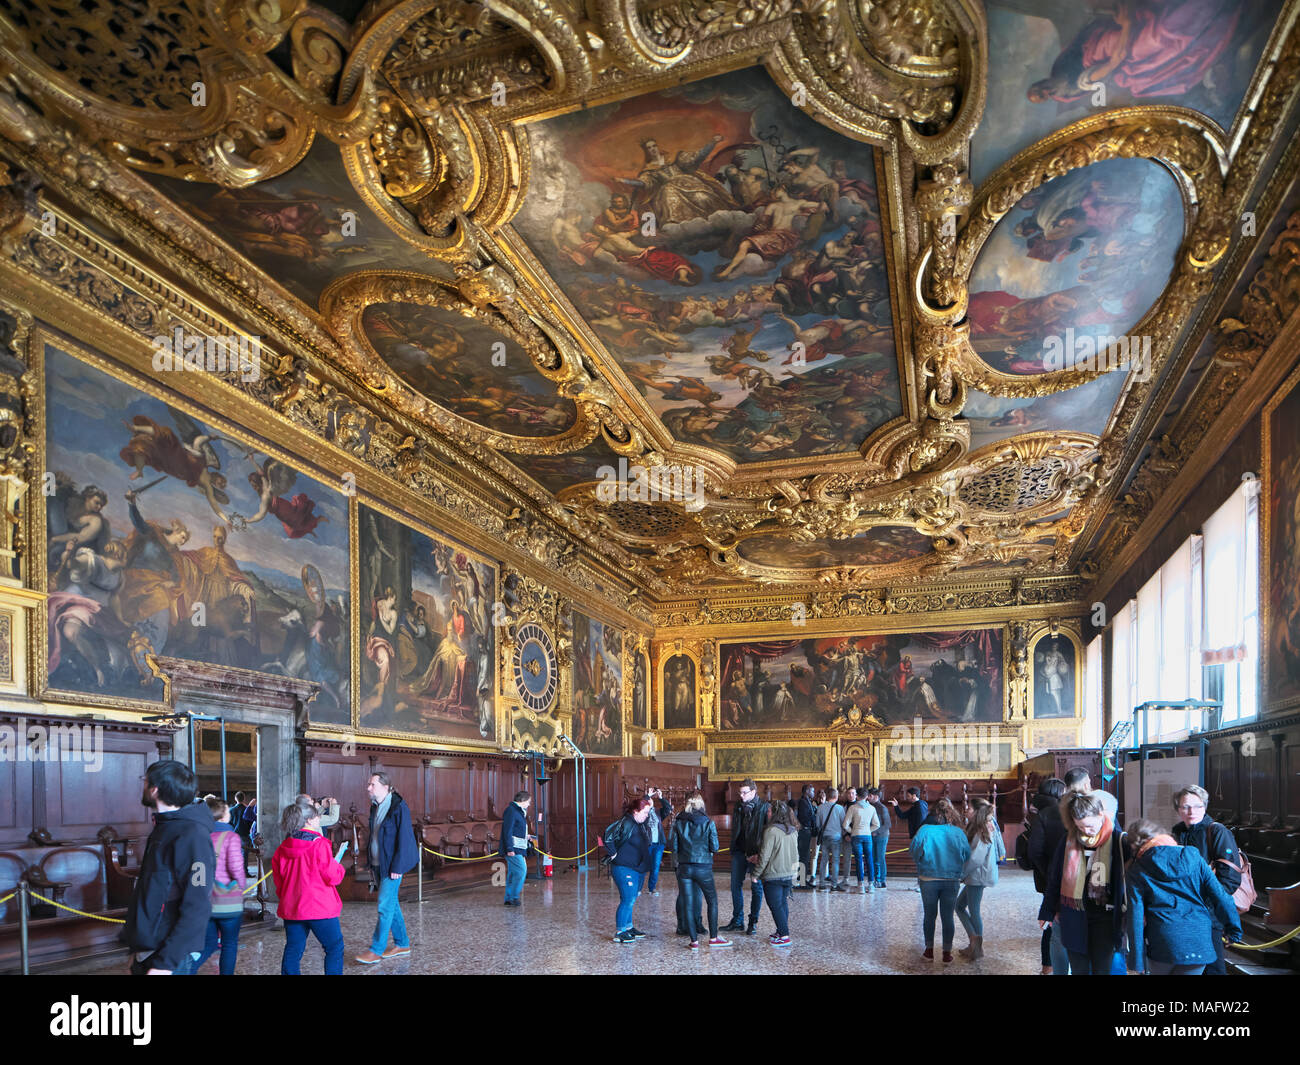 Interior ceiling view and artwork in the Doge's Palace in Venice Stock Photo